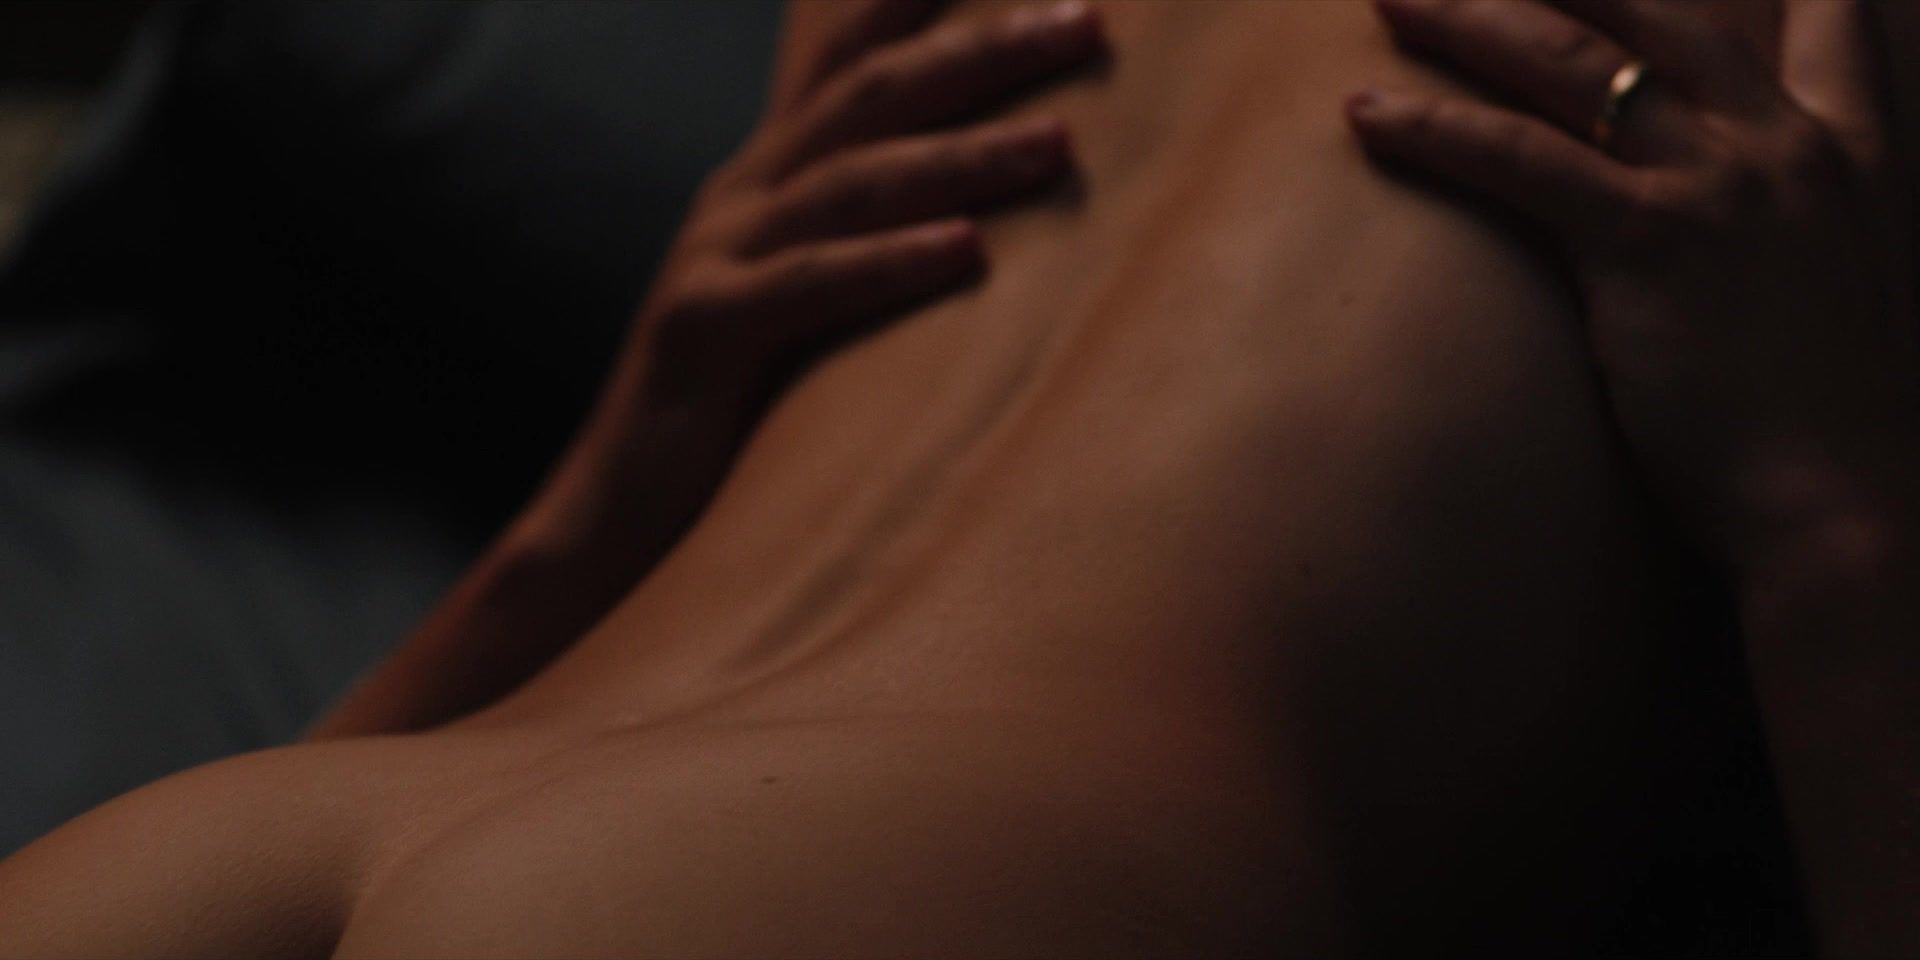 Sex Party Kelsey Asbille nude - Yellowstone s02e07 (2019) XHamsterCams - 1